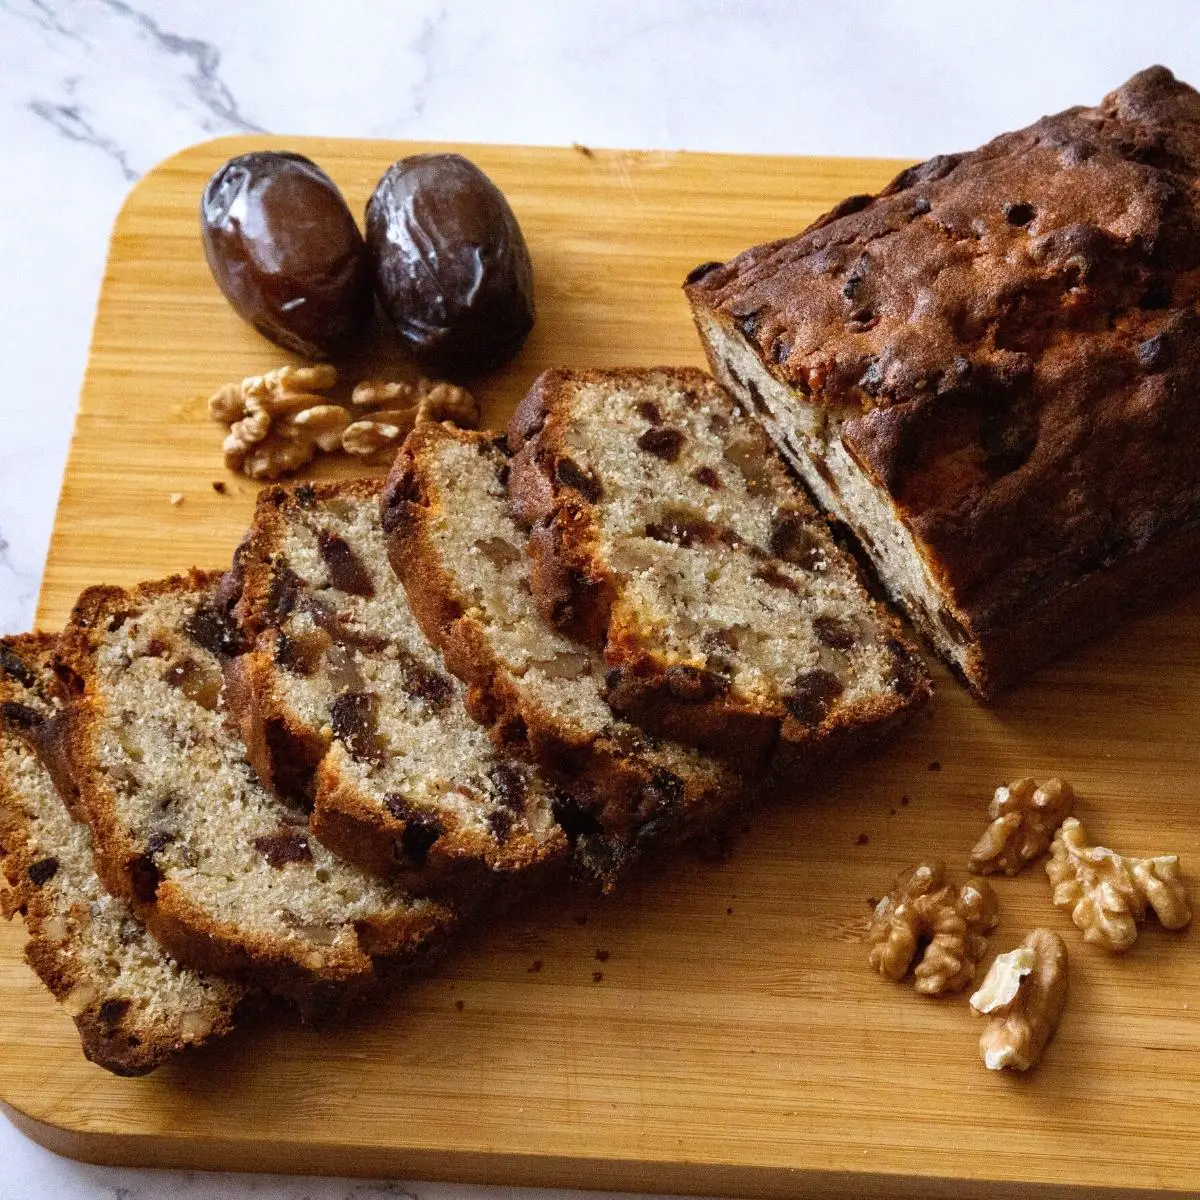 Date and Walnut Cake Recipe (with Semolina) - East Indian Recipes